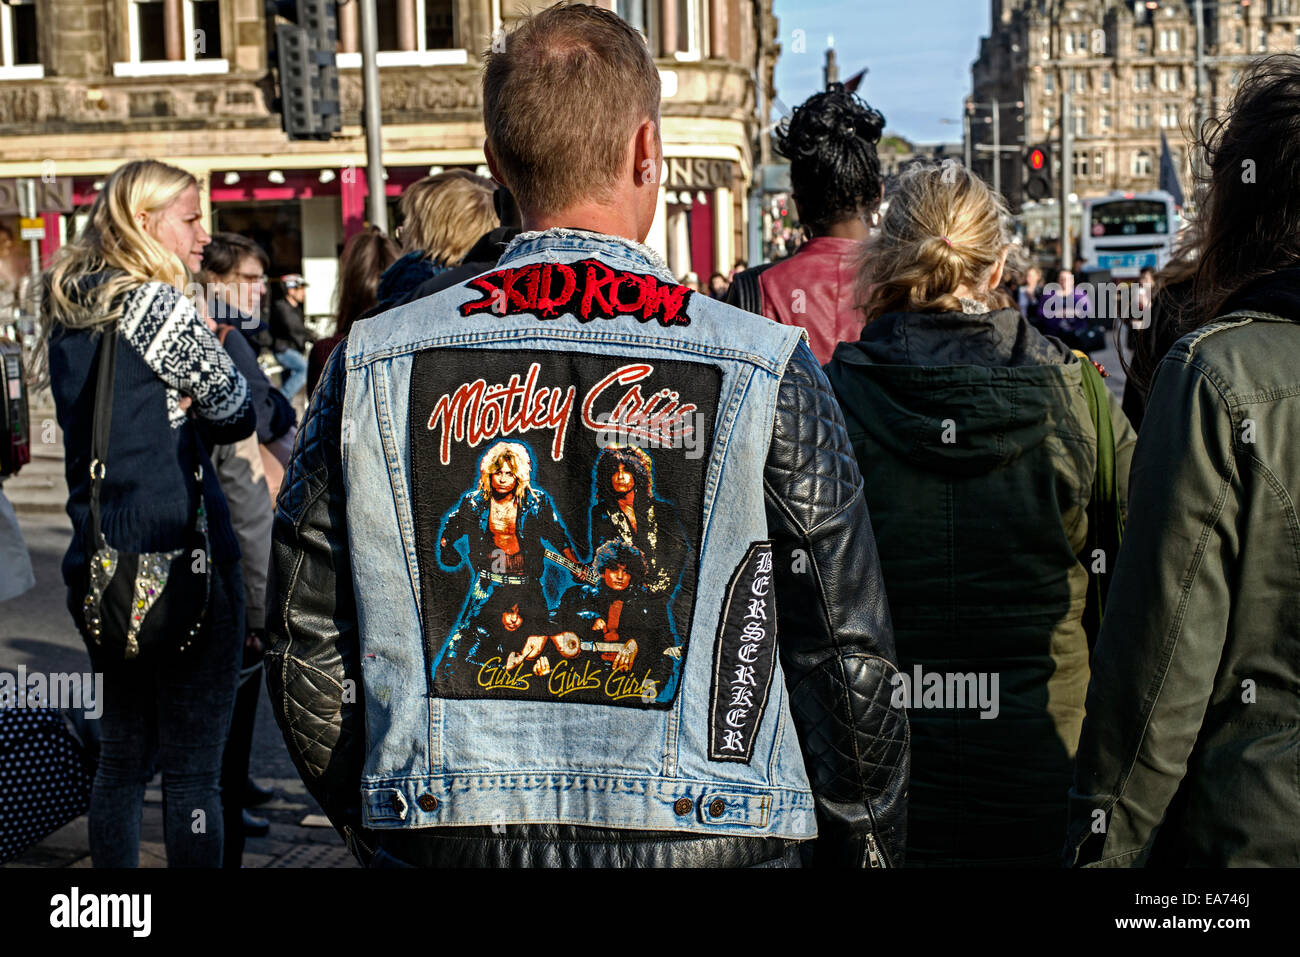 The back view of a young man wearing a black leather and denim jacket featuring the heavy metal bands Motley Crue and Skid Row. Stock Photo